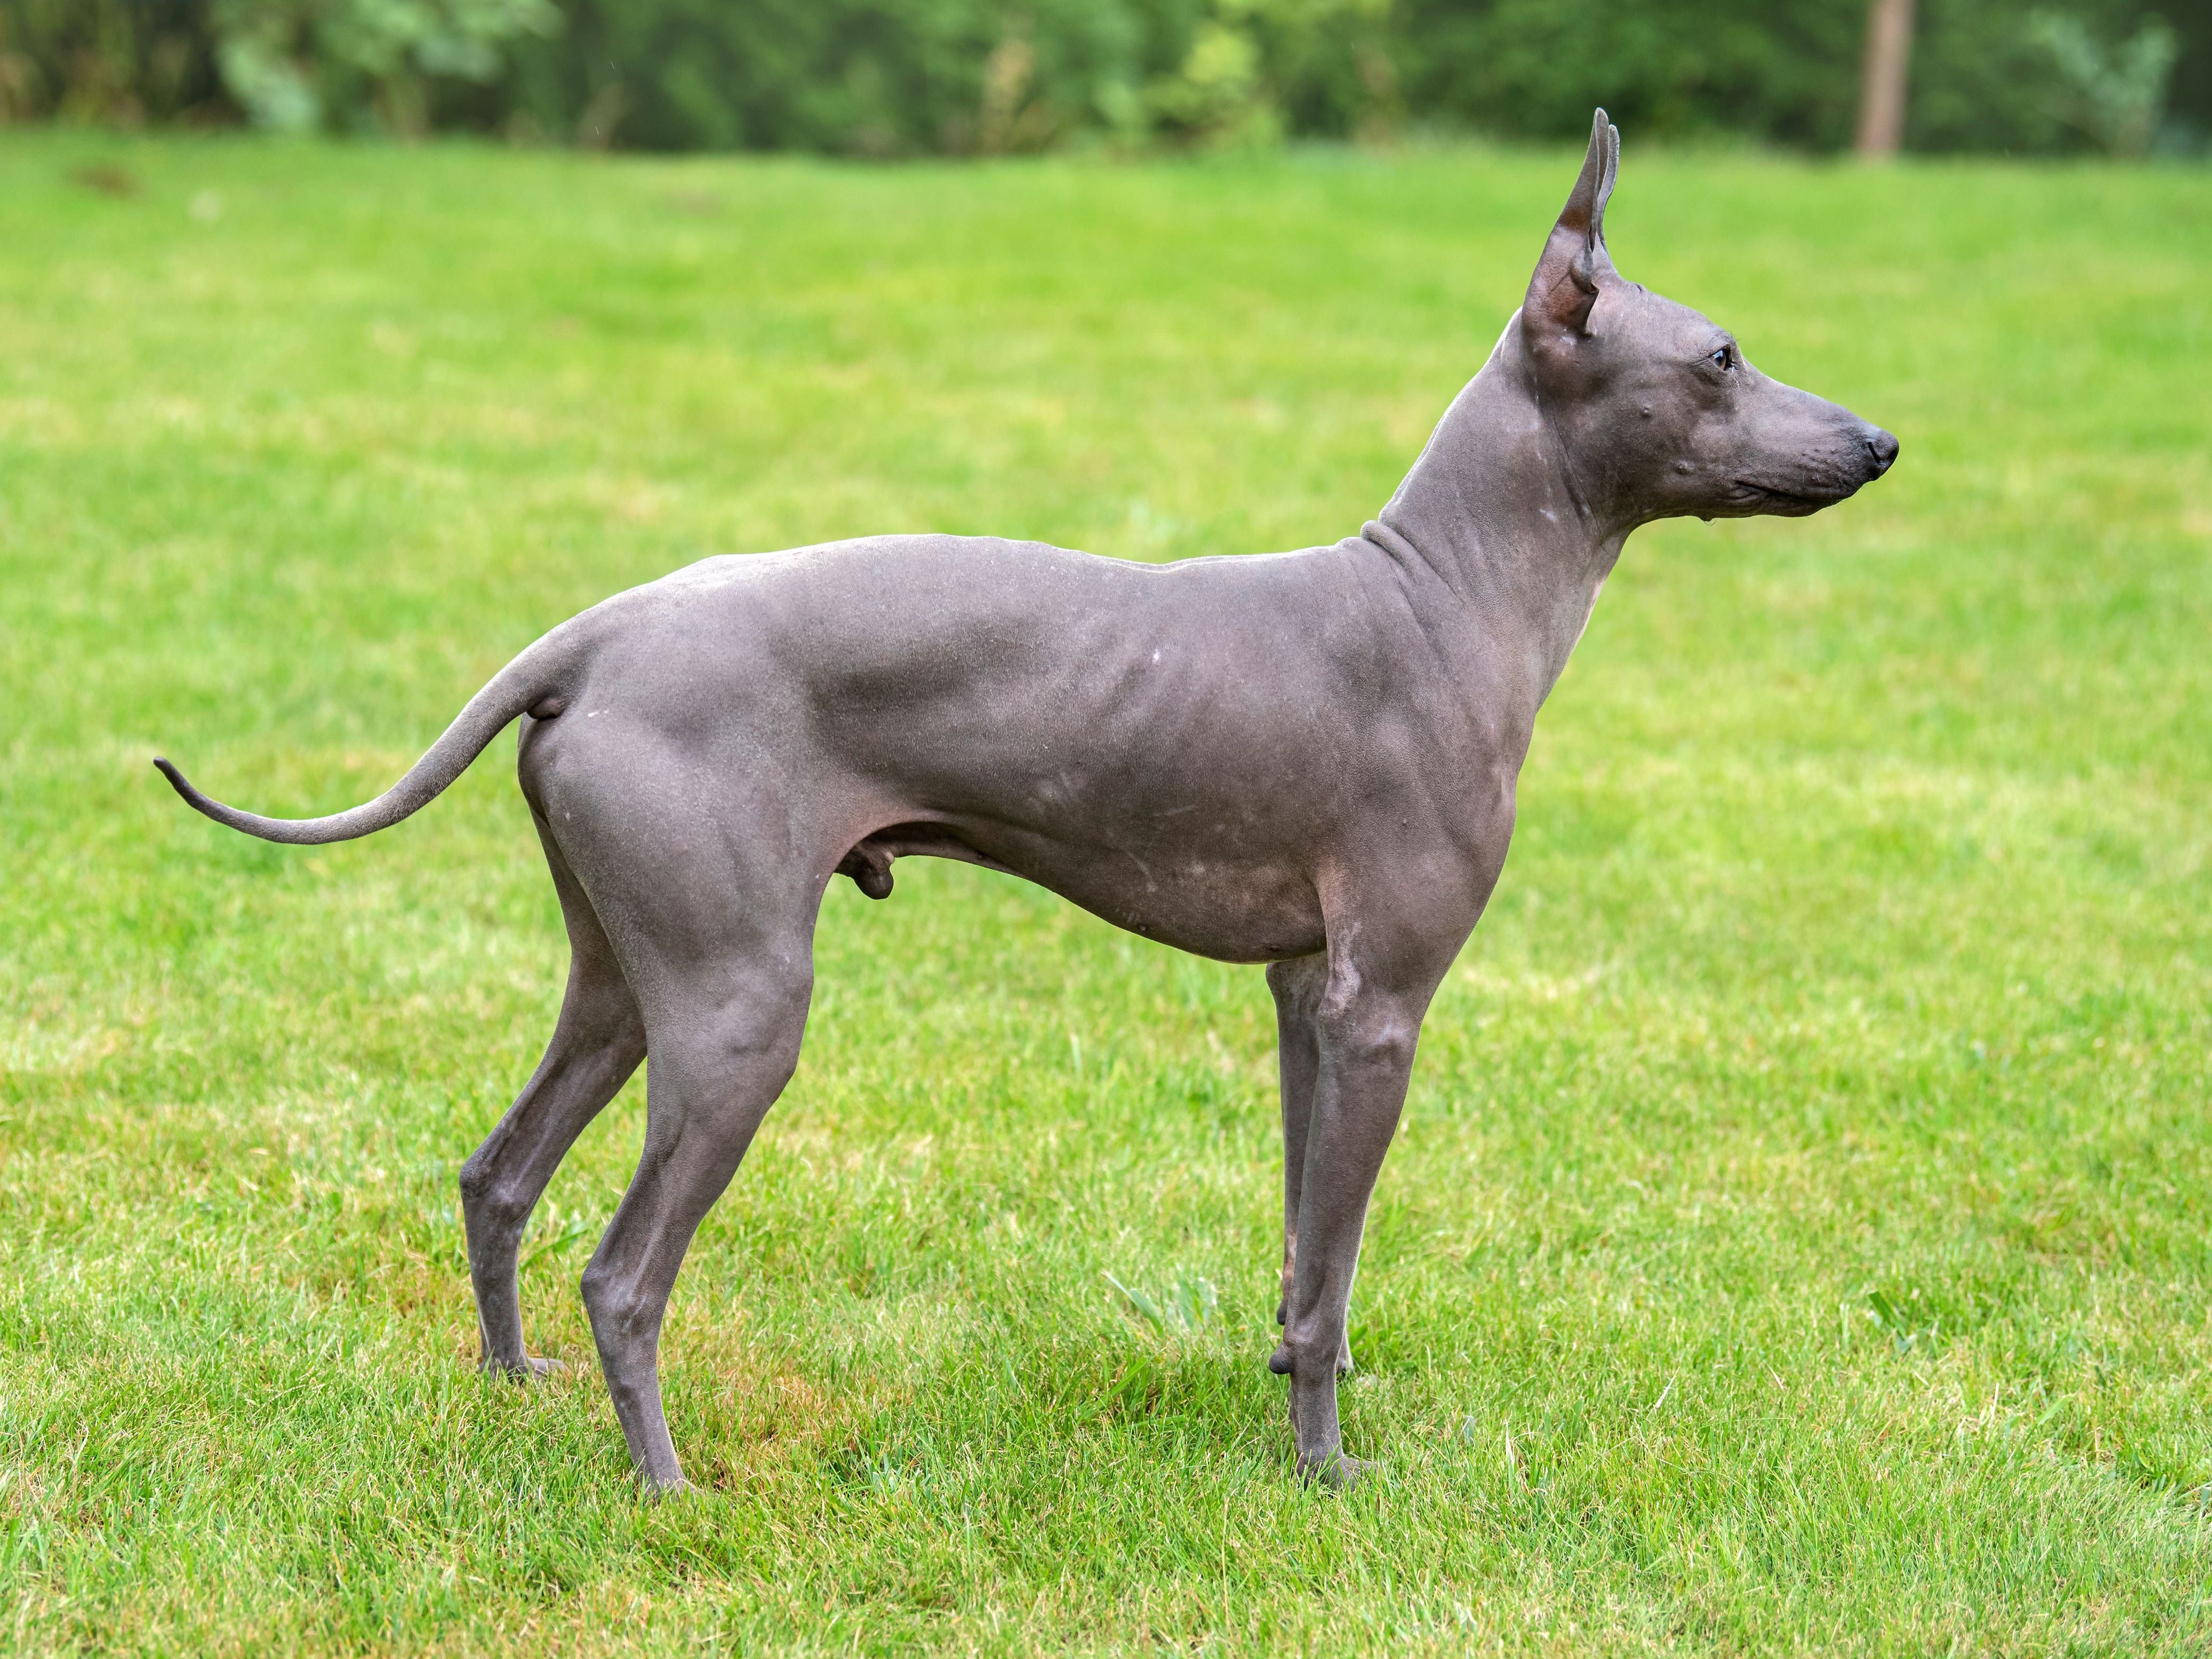 Do hairless dogs have hair or fur?